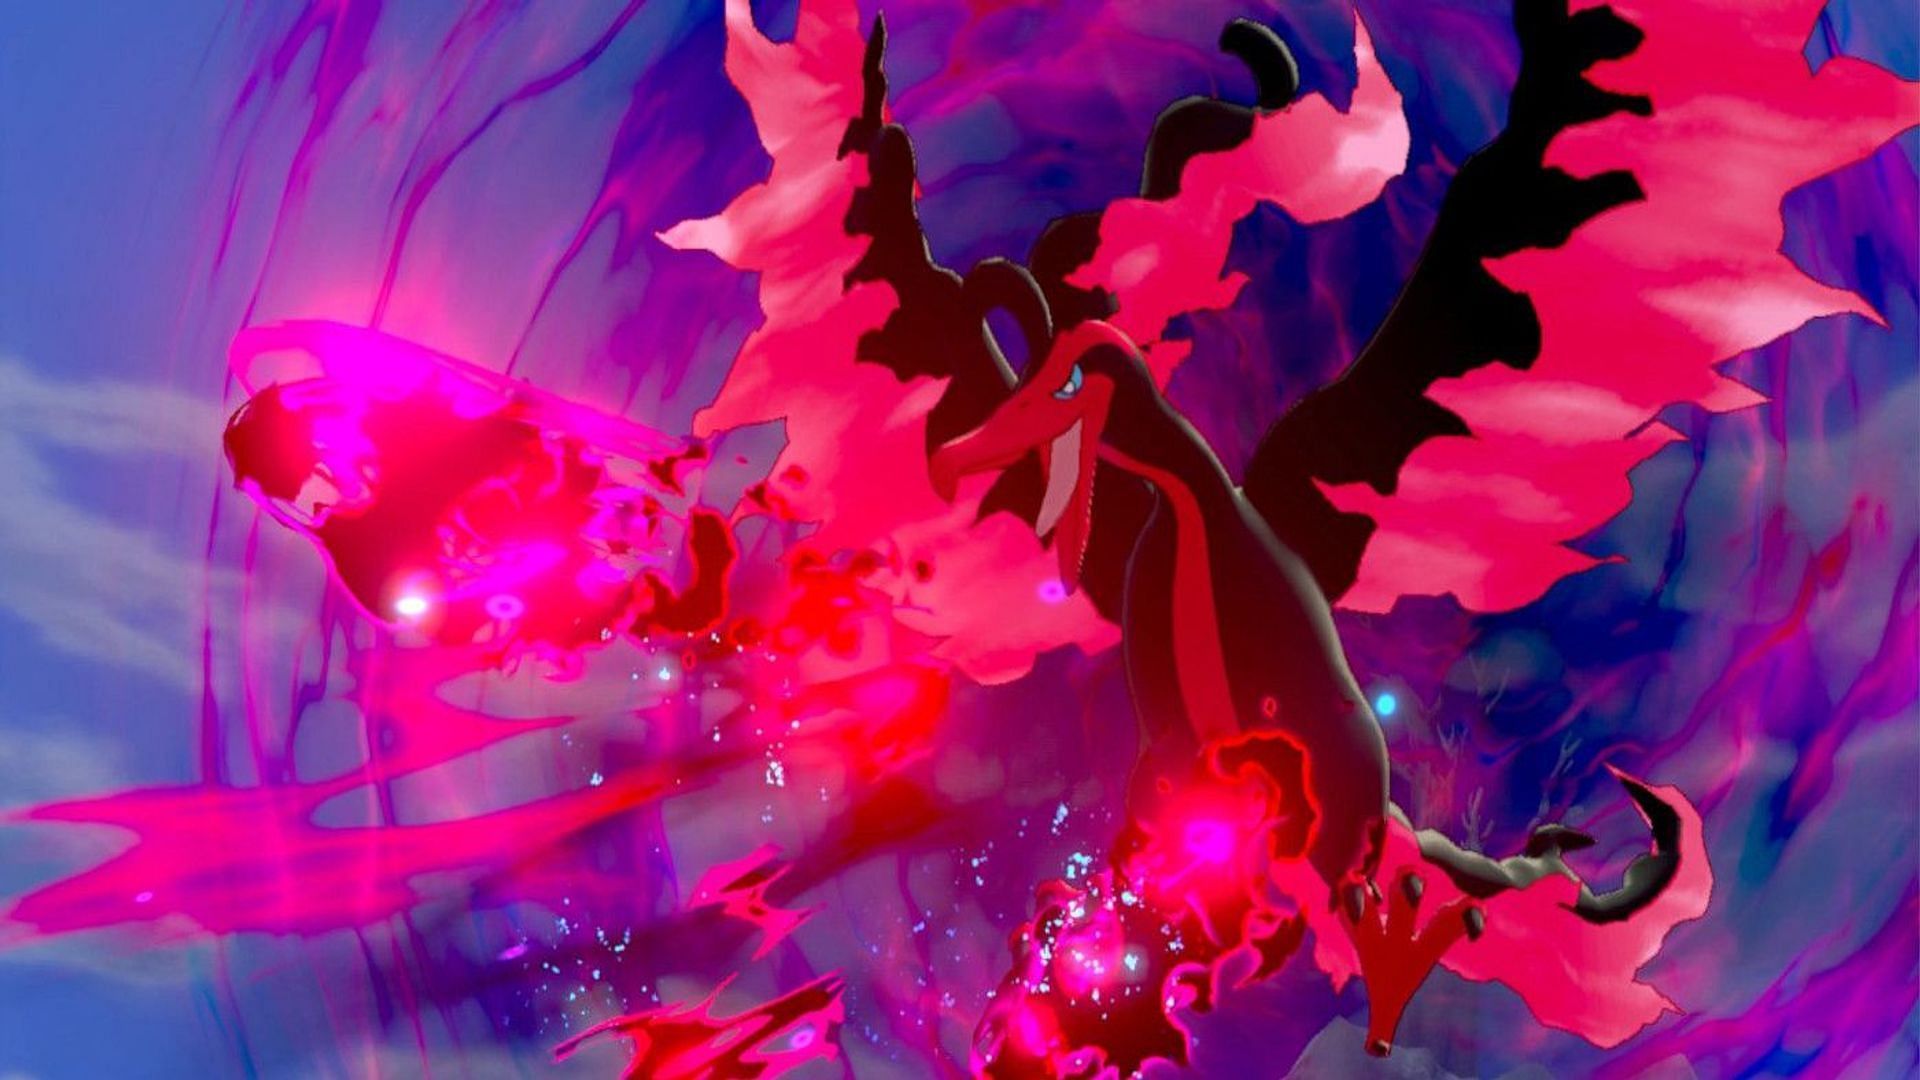 Galarian Moltres as it appears in Pokemon Sword and Shield (Image via The Pokemon Company)